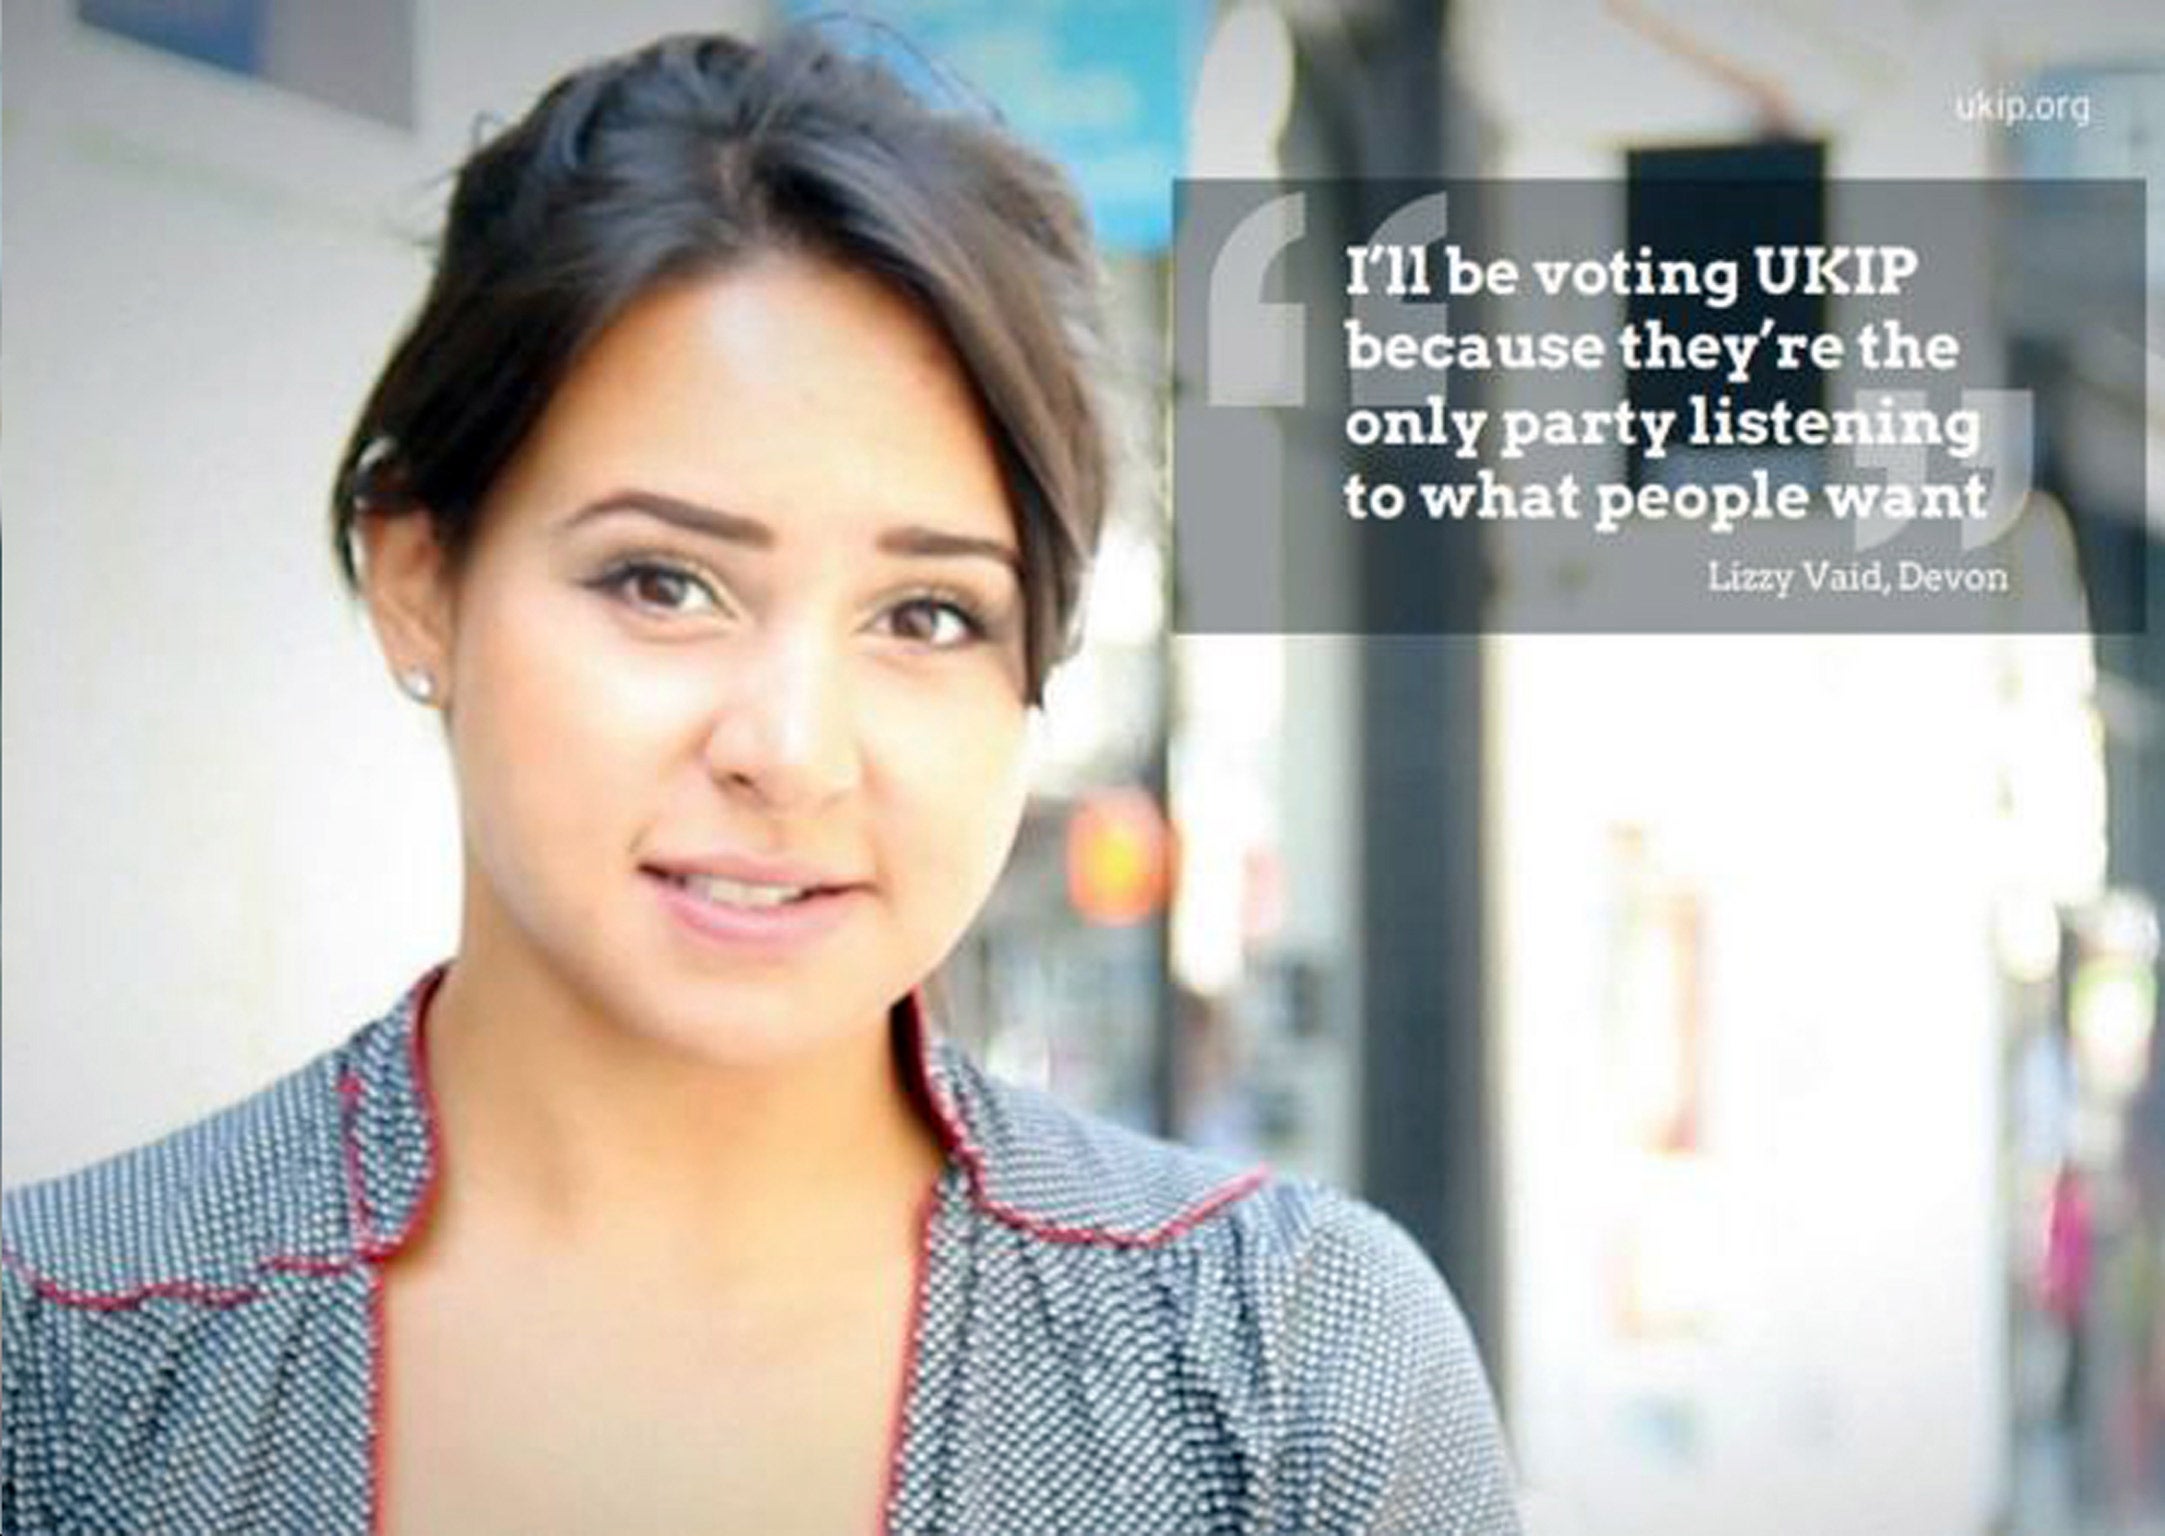 Lizzy Vaid poses as a voter from Devon on the poster